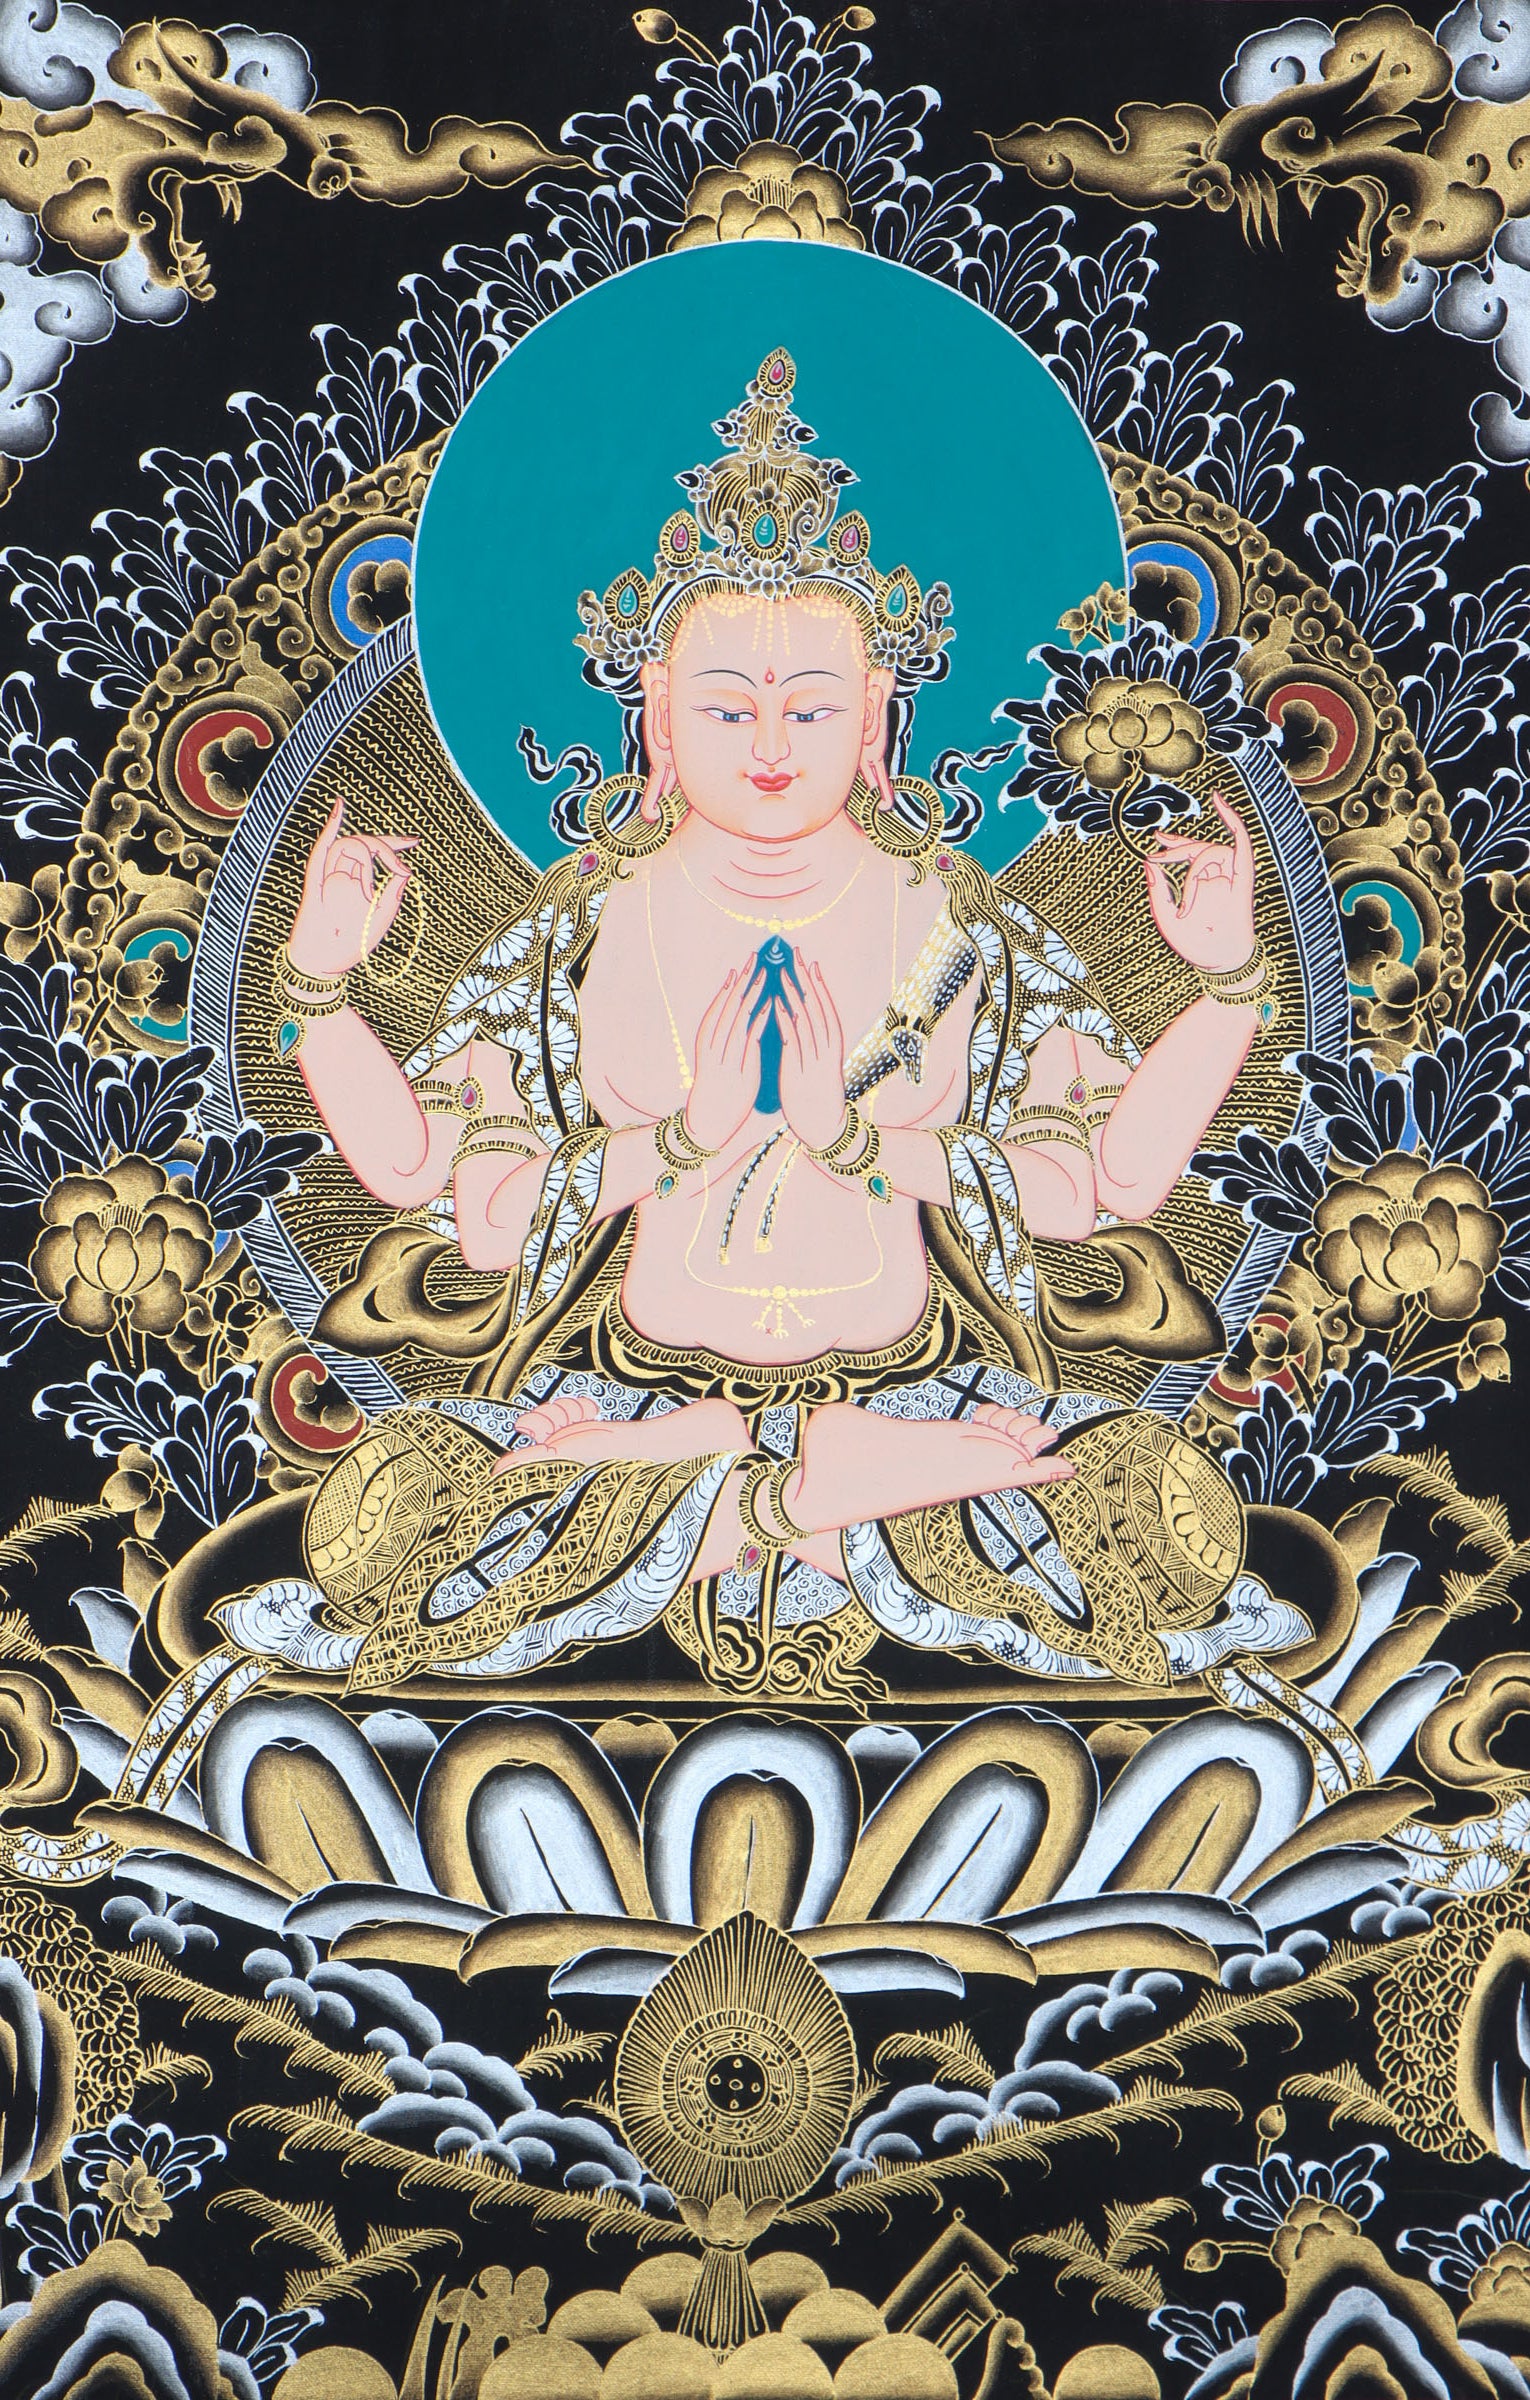  Chenrezig thangka serves as an educational tool, depicting the iconography and symbolism associated with Chenrezig. 